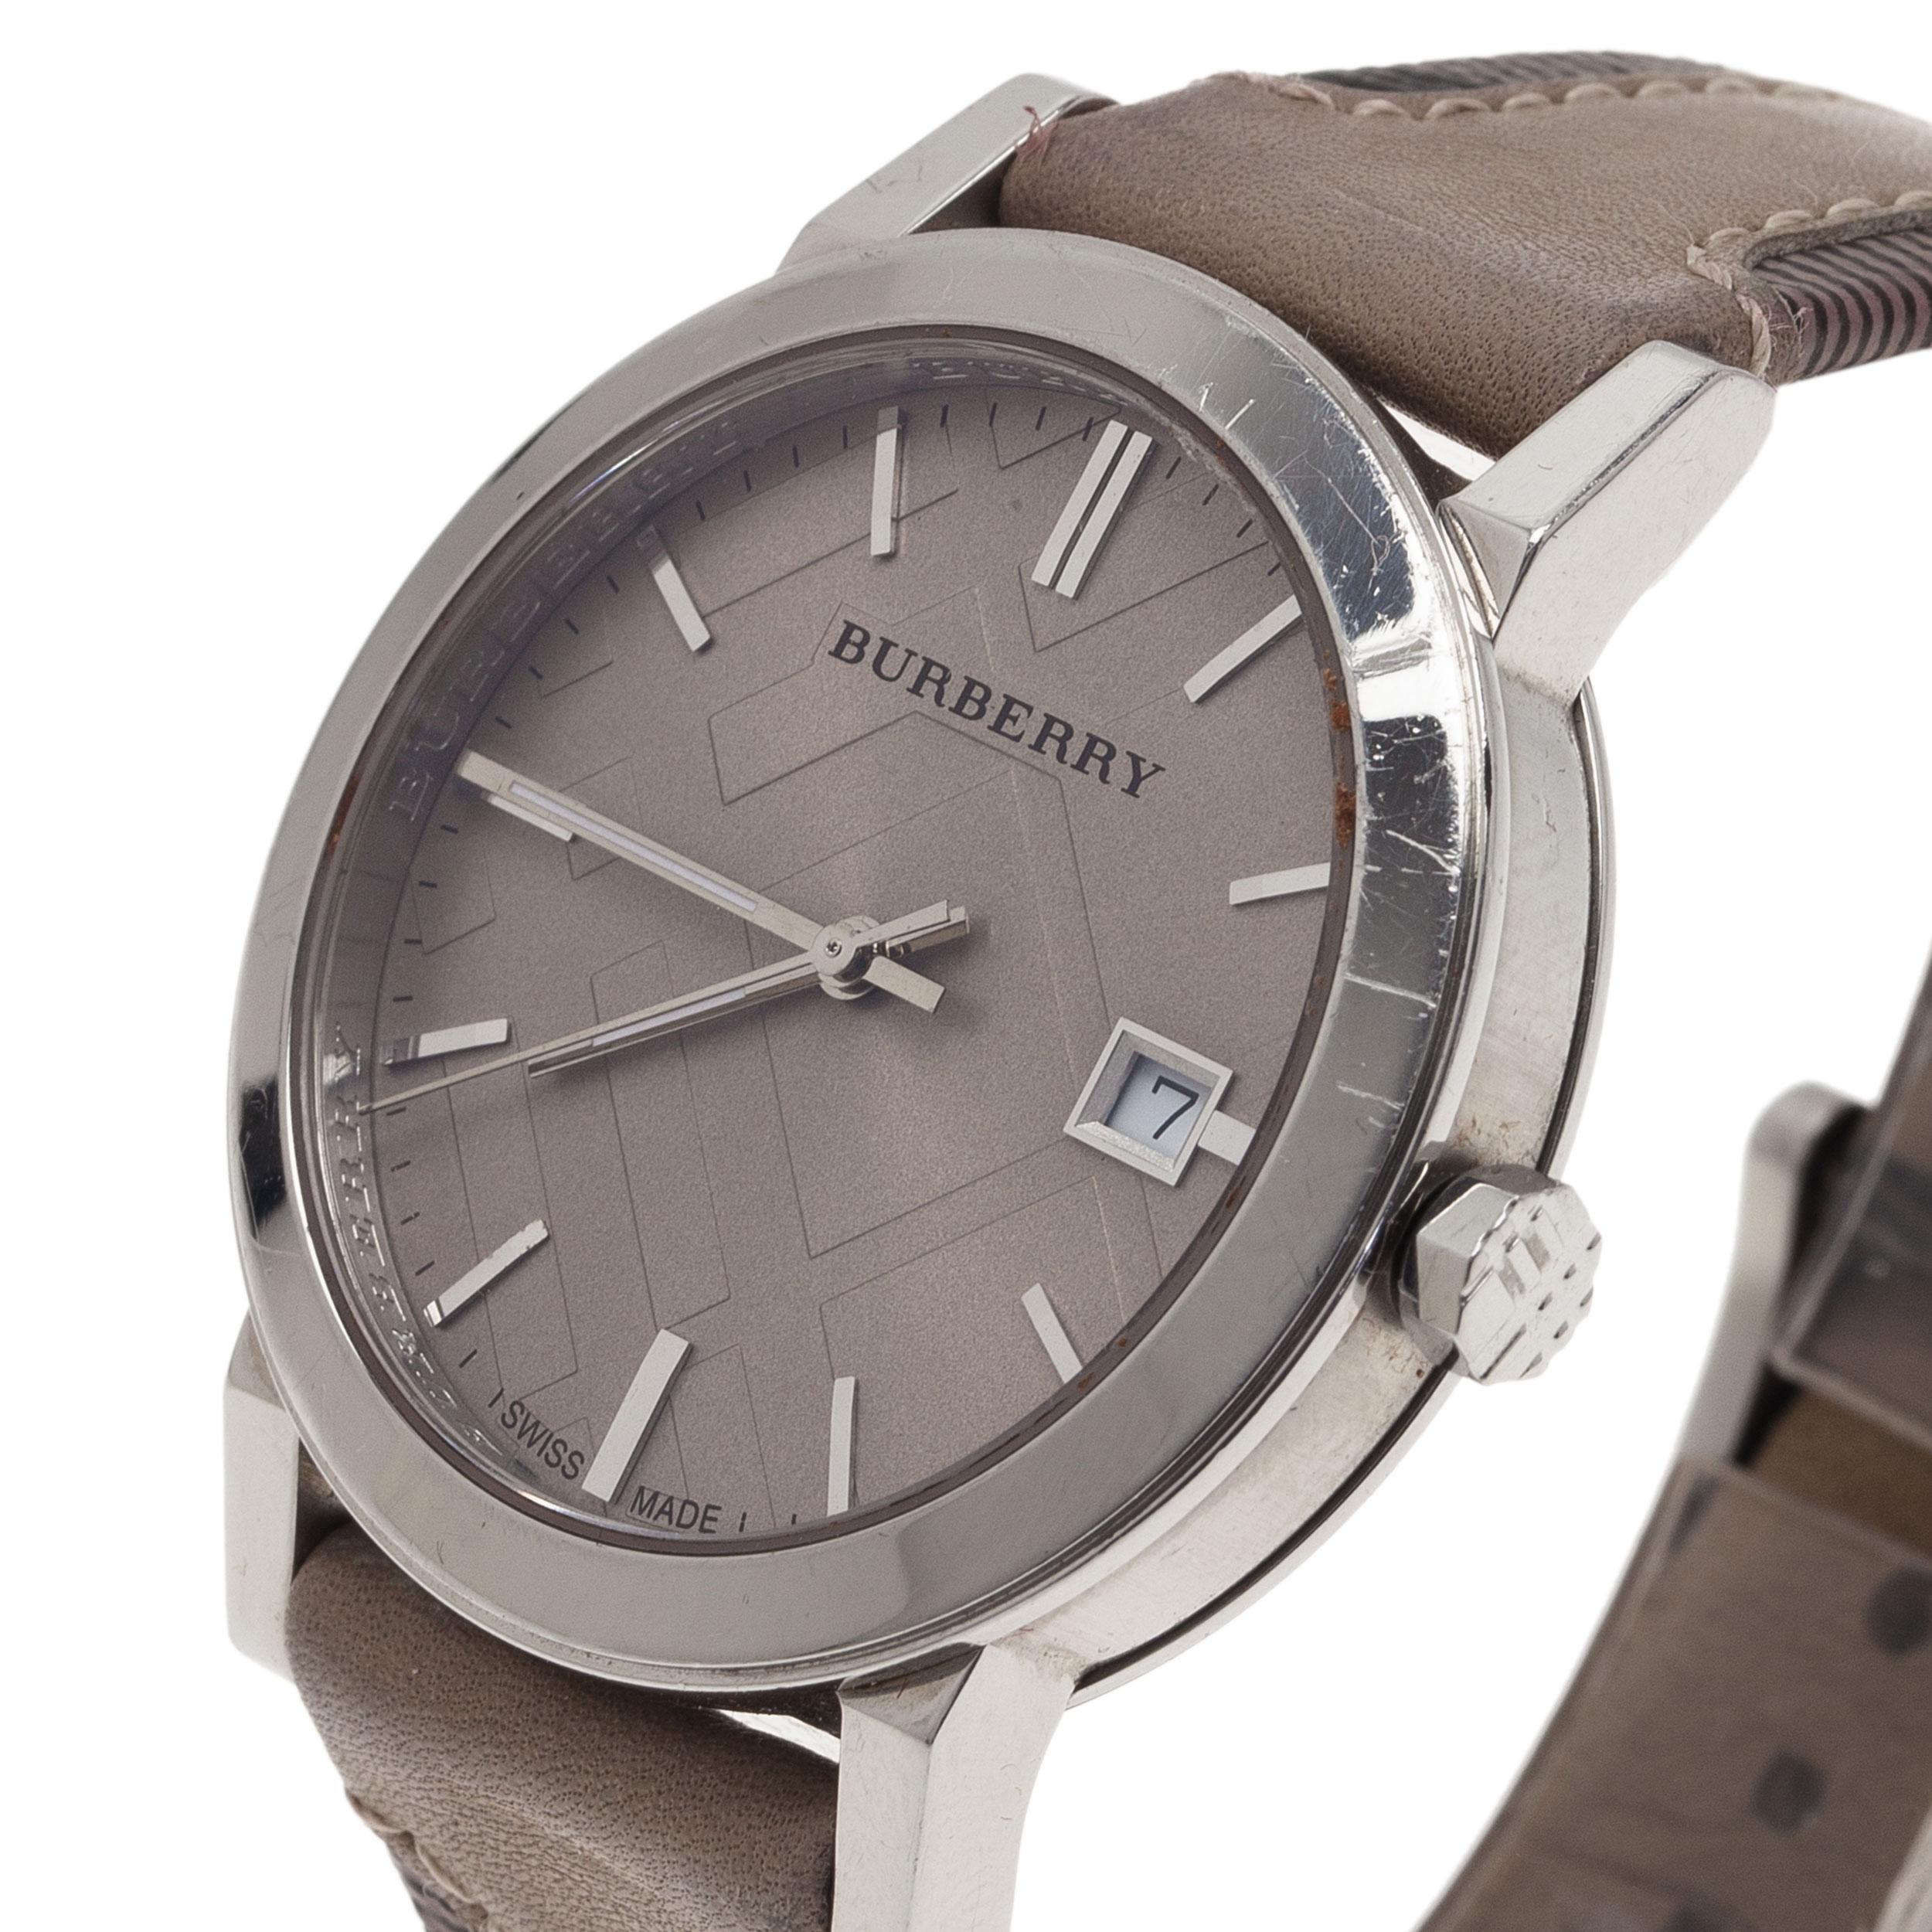 This Burberry Haymarket wristwatch comes crafted in stainless steel. The rounded case holds a bezel housing a dial embossed with check. It features silver-tone hour index bars, slim hands and a date window at 3 o'clock. It comes with a leather